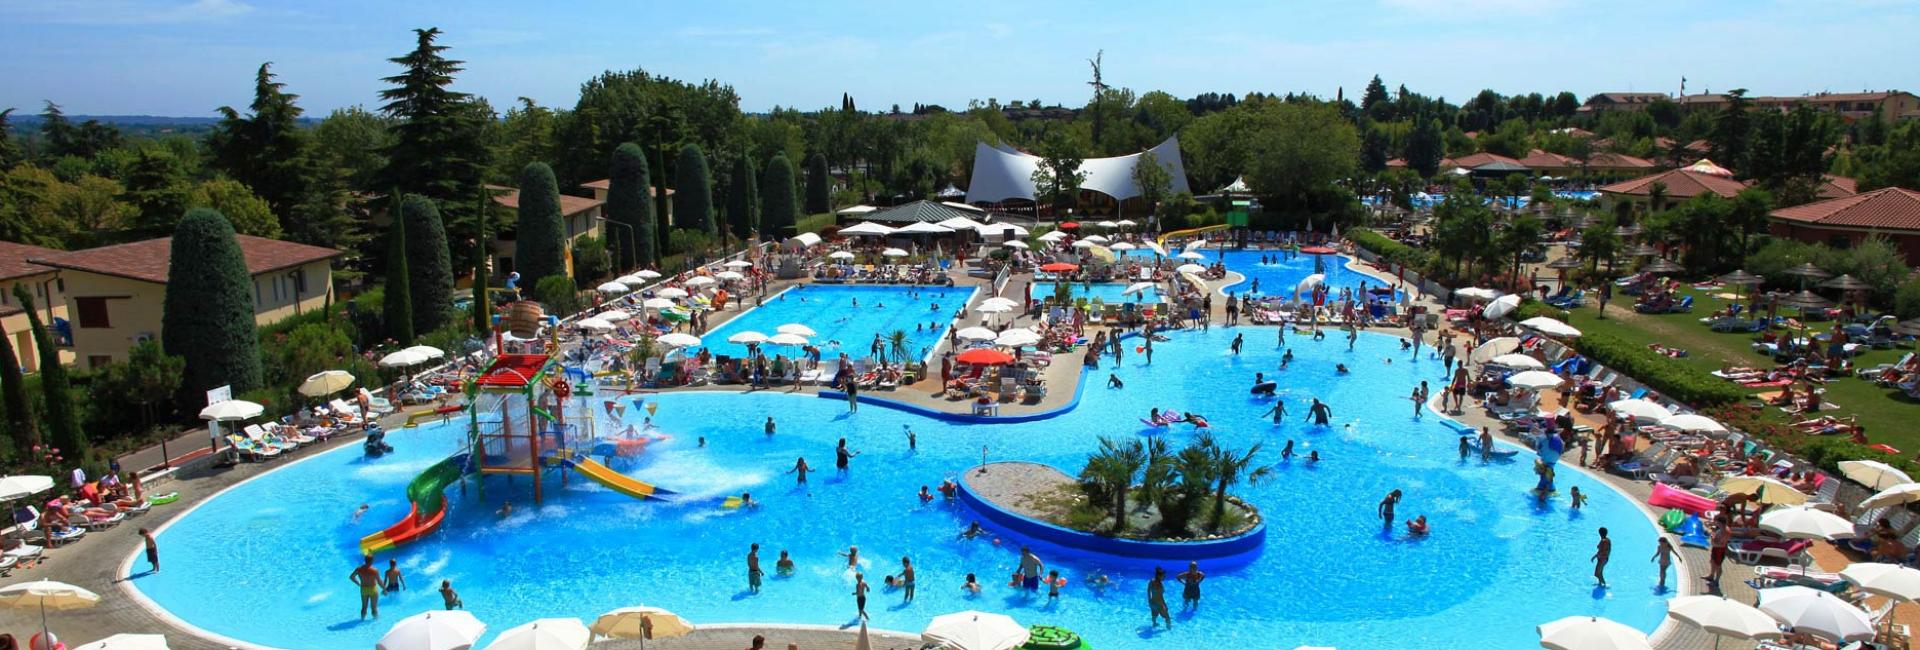 camping-bellaitalia fr 1-fr-315266-offre-speciale-ouverture 019